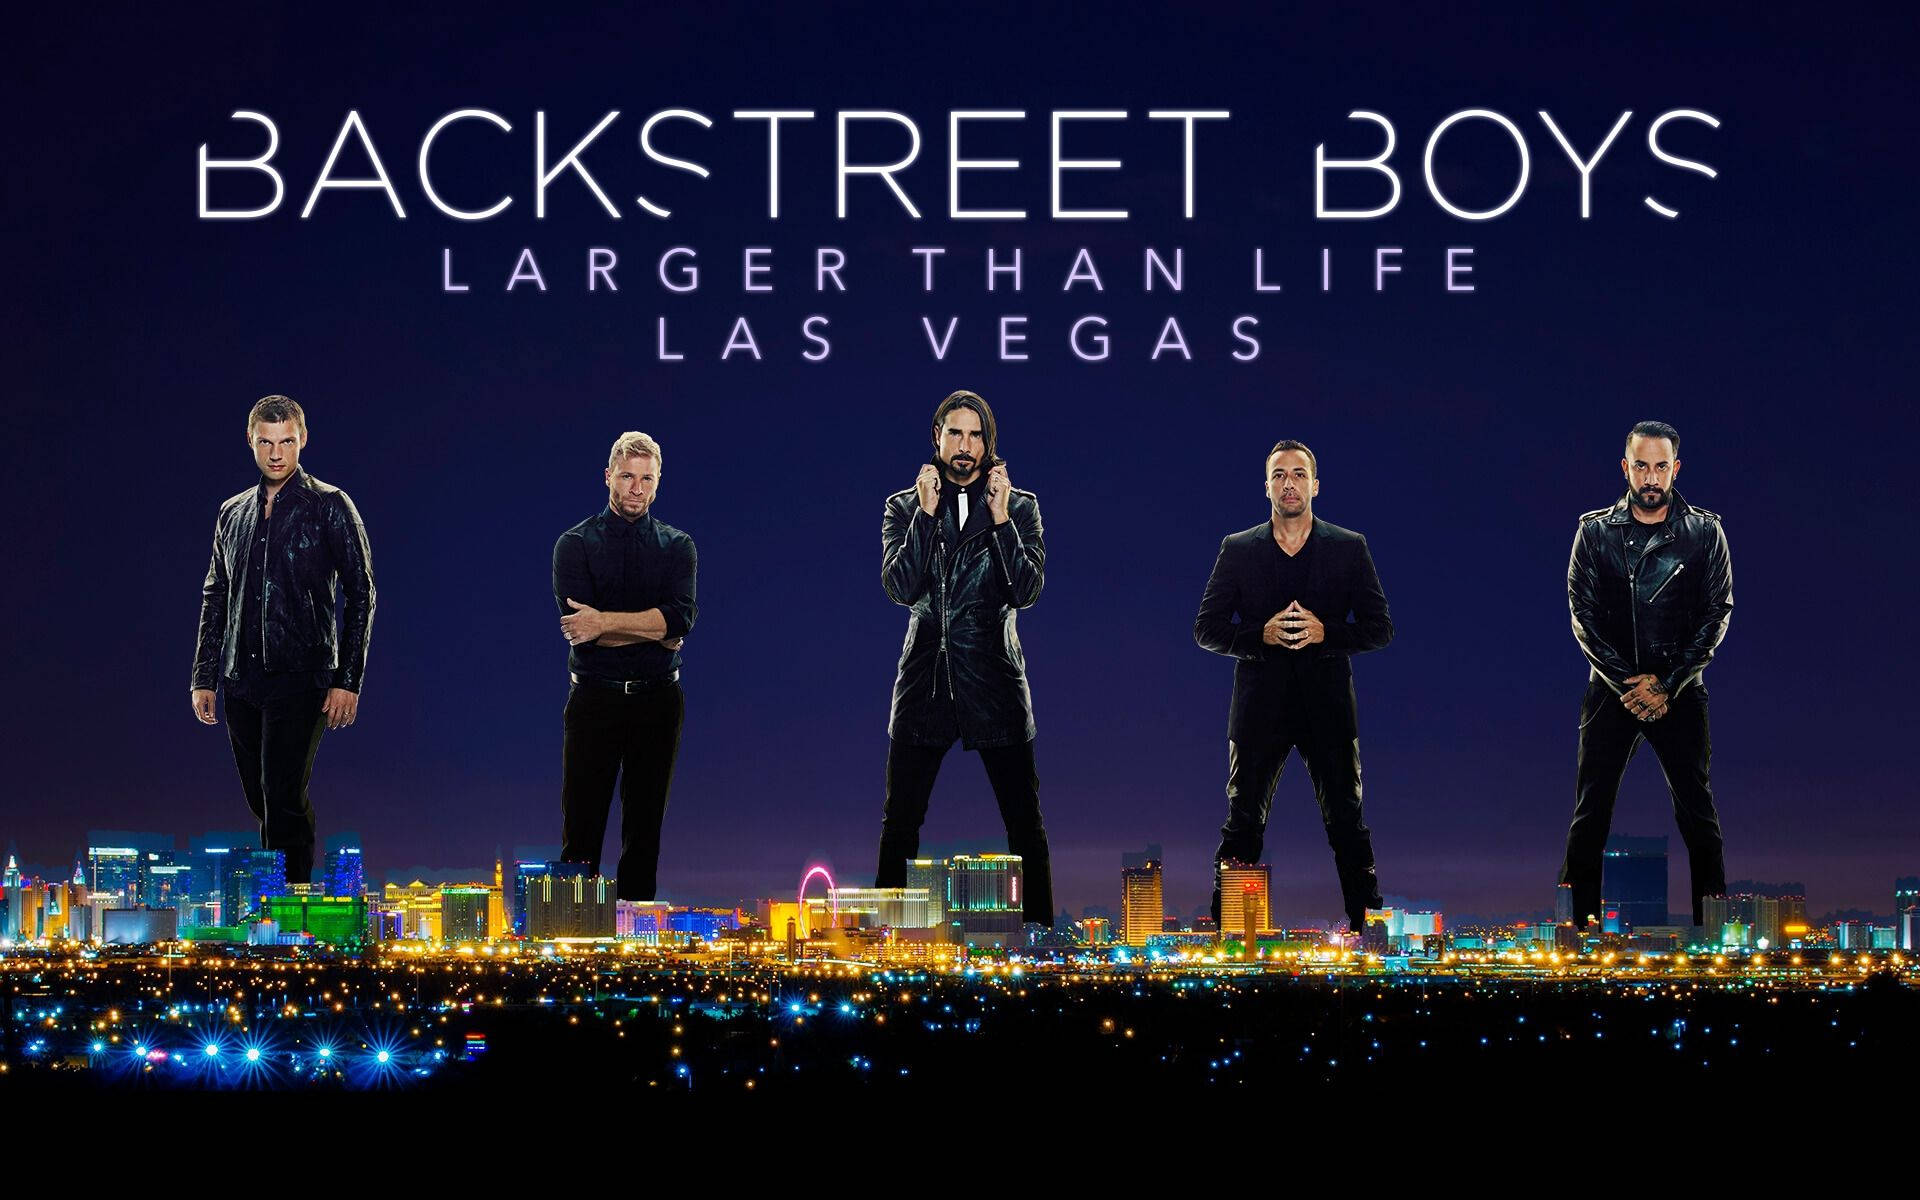 The Backstreet Boys Taking The Stage In Las Vegas. Background